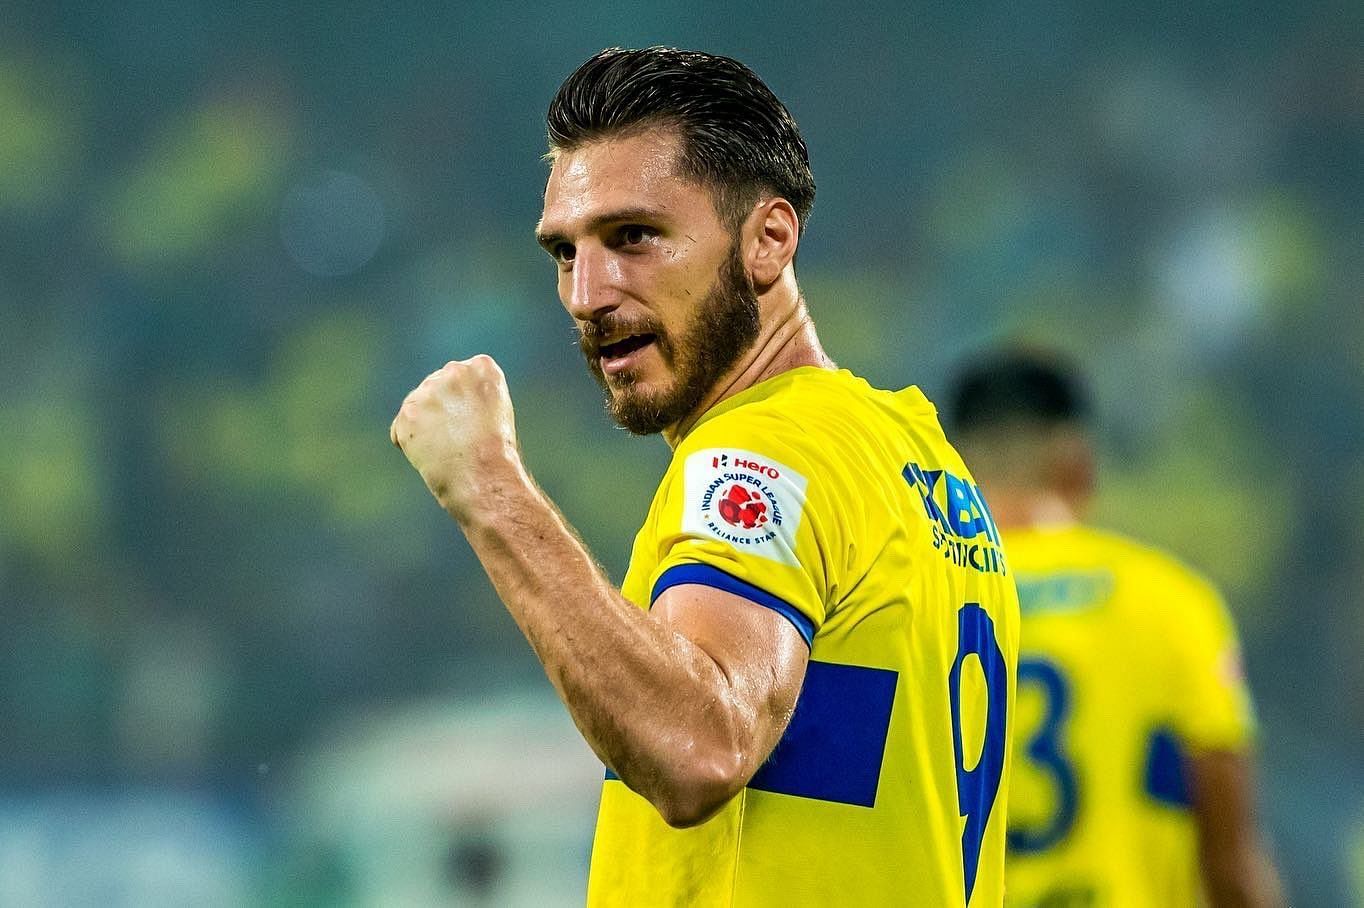 Kerala Blasters striker, Dimitrios Diamantakos has been in great form in this edition of the ISL having already scored seven goals in the first half of the season